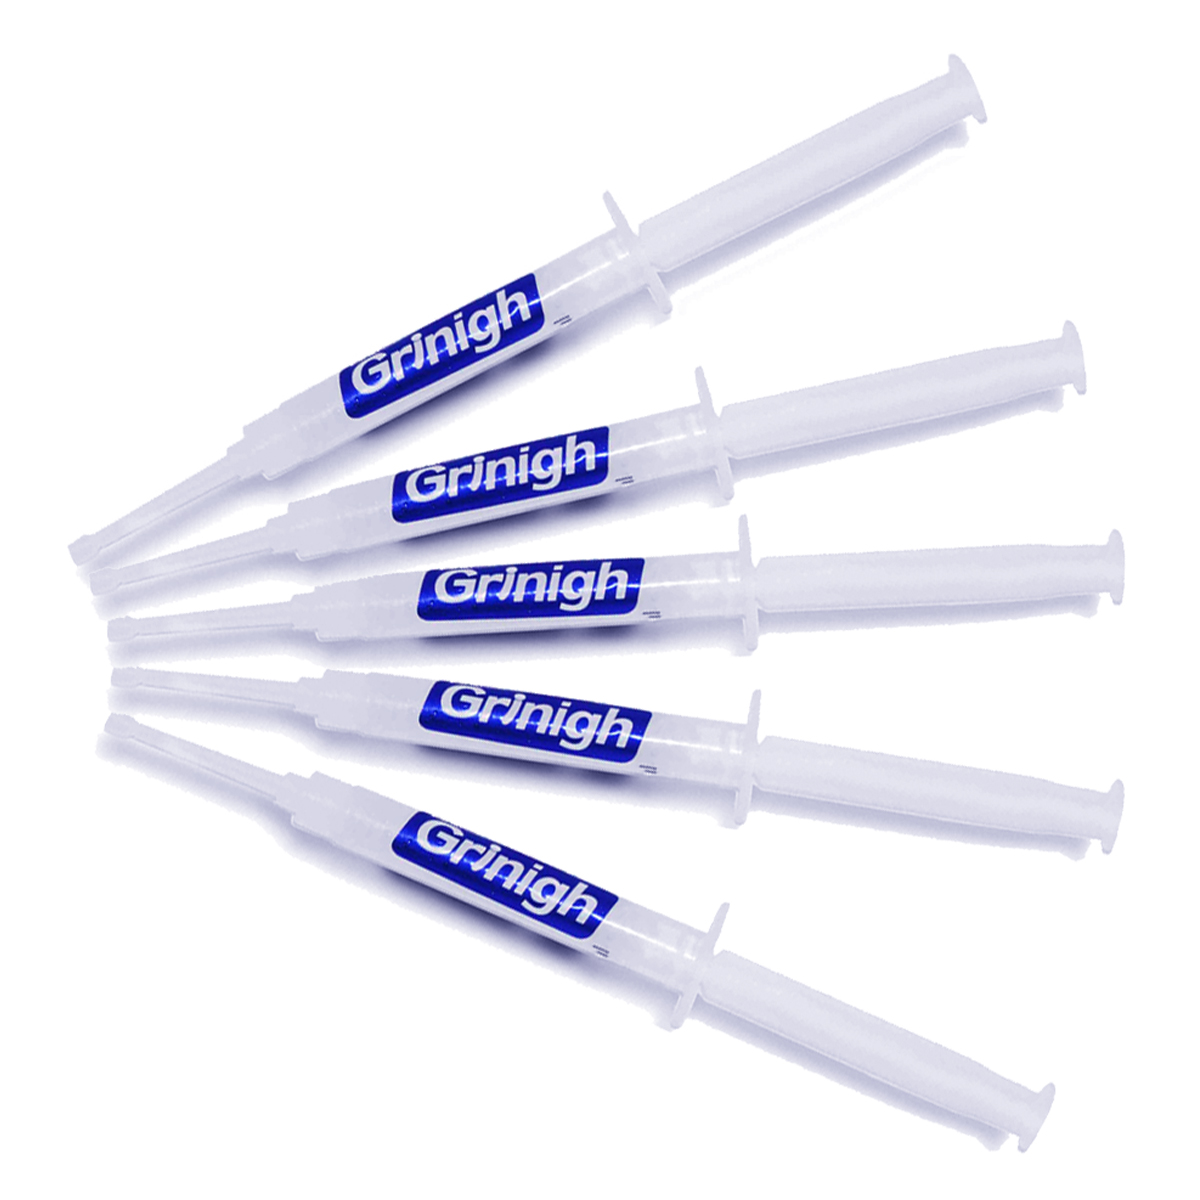 Grin365 3ml Teeth Whitening Gel replacement syringes for Whitening System - Refill Kit with More Than 15 Treatments